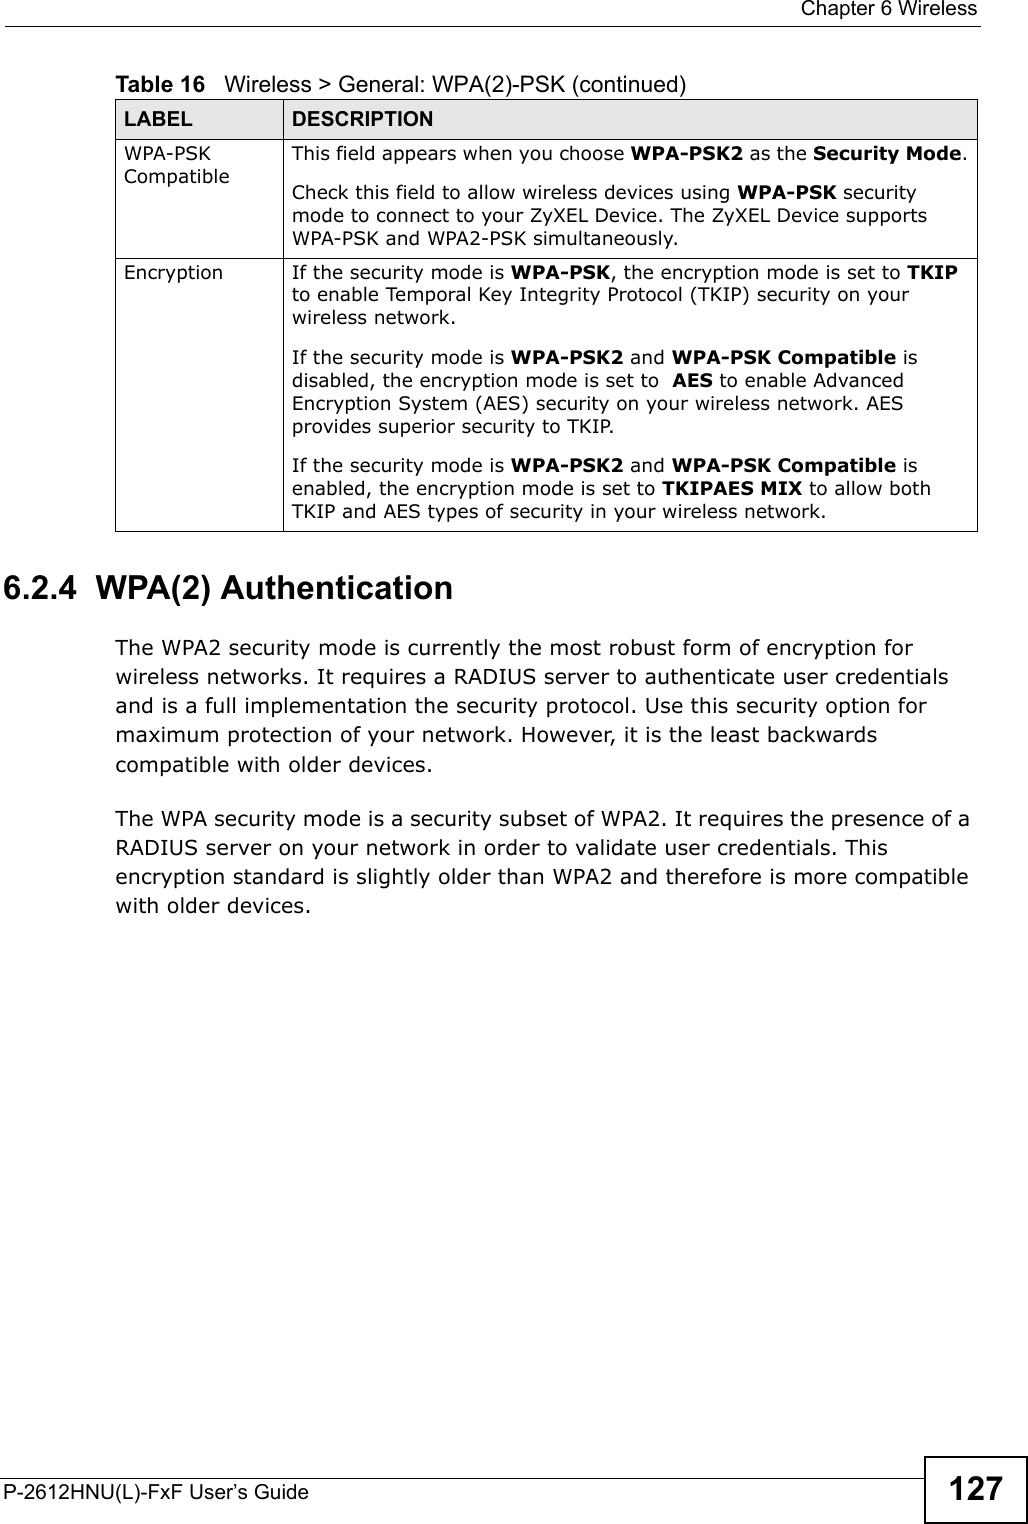  Chapter 6 WirelessP-2612HNU(L)-FxF User’s Guide 1276.2.4  WPA(2) AuthenticationThe WPA2 security mode is currently the most robust form of encryption for wireless networks. It requires a RADIUS server to authenticate user credentials and is a full implementation the security protocol. Use this security option for maximum protection of your network. However, it is the least backwards compatible with older devices.The WPA security mode is a security subset of WPA2. It requires the presence of a RADIUS server on your network in order to validate user credentials. This encryption standard is slightly older than WPA2 and therefore is more compatible with older devices.WPA-PSK CompatibleThis field appears when you choose WPA-PSK2 as the Security Mode.Check this field to allow wireless devices using WPA-PSK securitymode to connect to your ZyXEL Device. The ZyXEL Device supports WPA-PSK and WPA2-PSK simultaneously.Encryption If the security mode is WPA-PSK, the encryption mode is set to TKIPto enable Temporal Key Integrity Protocol (TKIP) security on yourwireless network. If the security mode is WPA-PSK2 and WPA-PSK Compatible isdisabled, the encryption mode is set to  AES to enable Advanced Encryption System (AES) security on your wireless network. AES provides superior security to TKIP.If the security mode is WPA-PSK2 and WPA-PSK Compatible isenabled, the encryption mode is set to TKIPAES MIX to allow bothTKIP and AES types of security in your wireless network.Table 16   Wireless &gt; General: WPA(2)-PSK (continued)LABEL DESCRIPTION